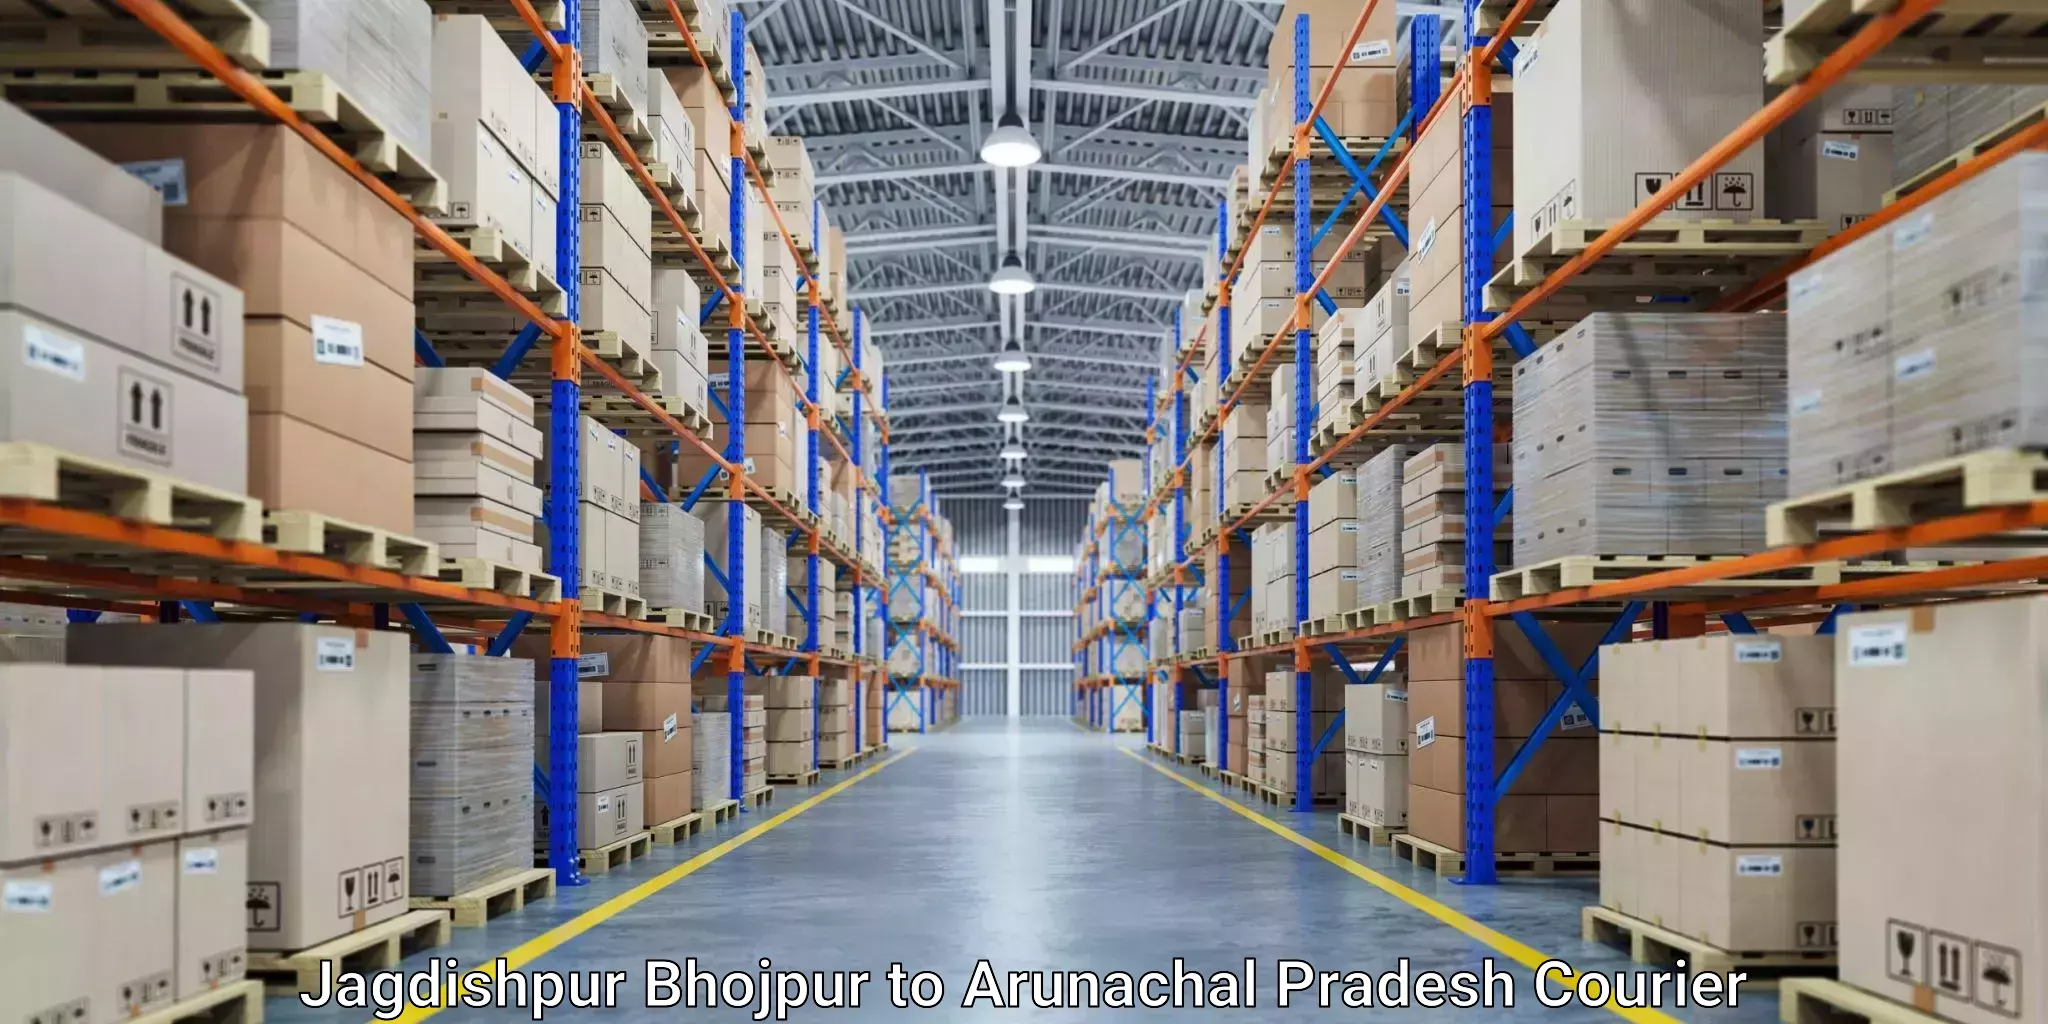 Global shipping networks Jagdishpur Bhojpur to Papum Pare